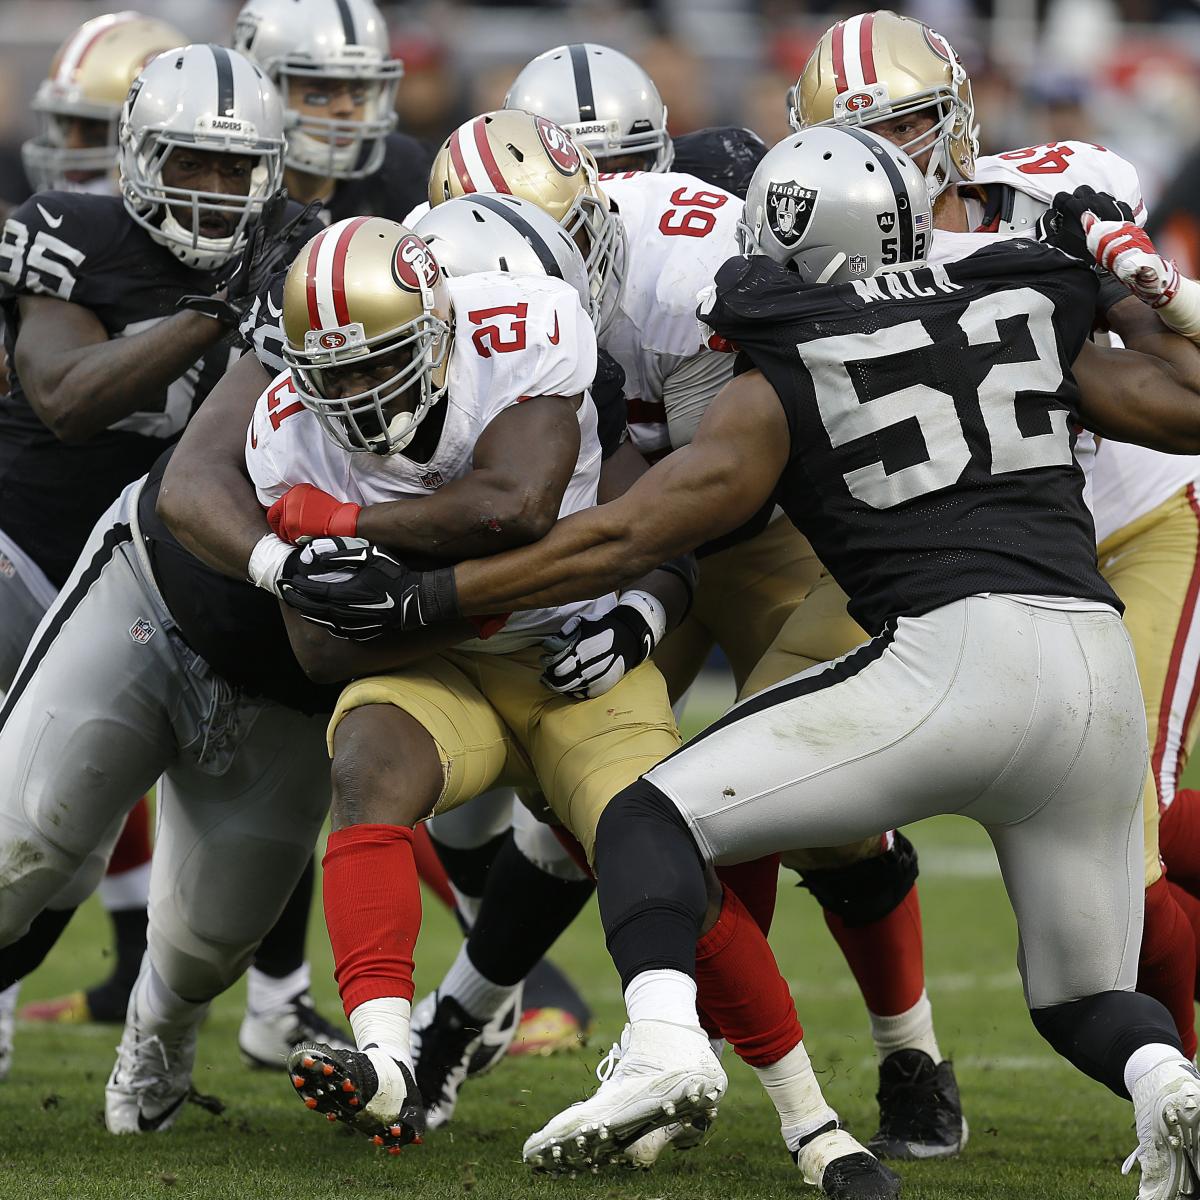 Takeaways from the 49ers' Week 14 Loss Against the Raiders